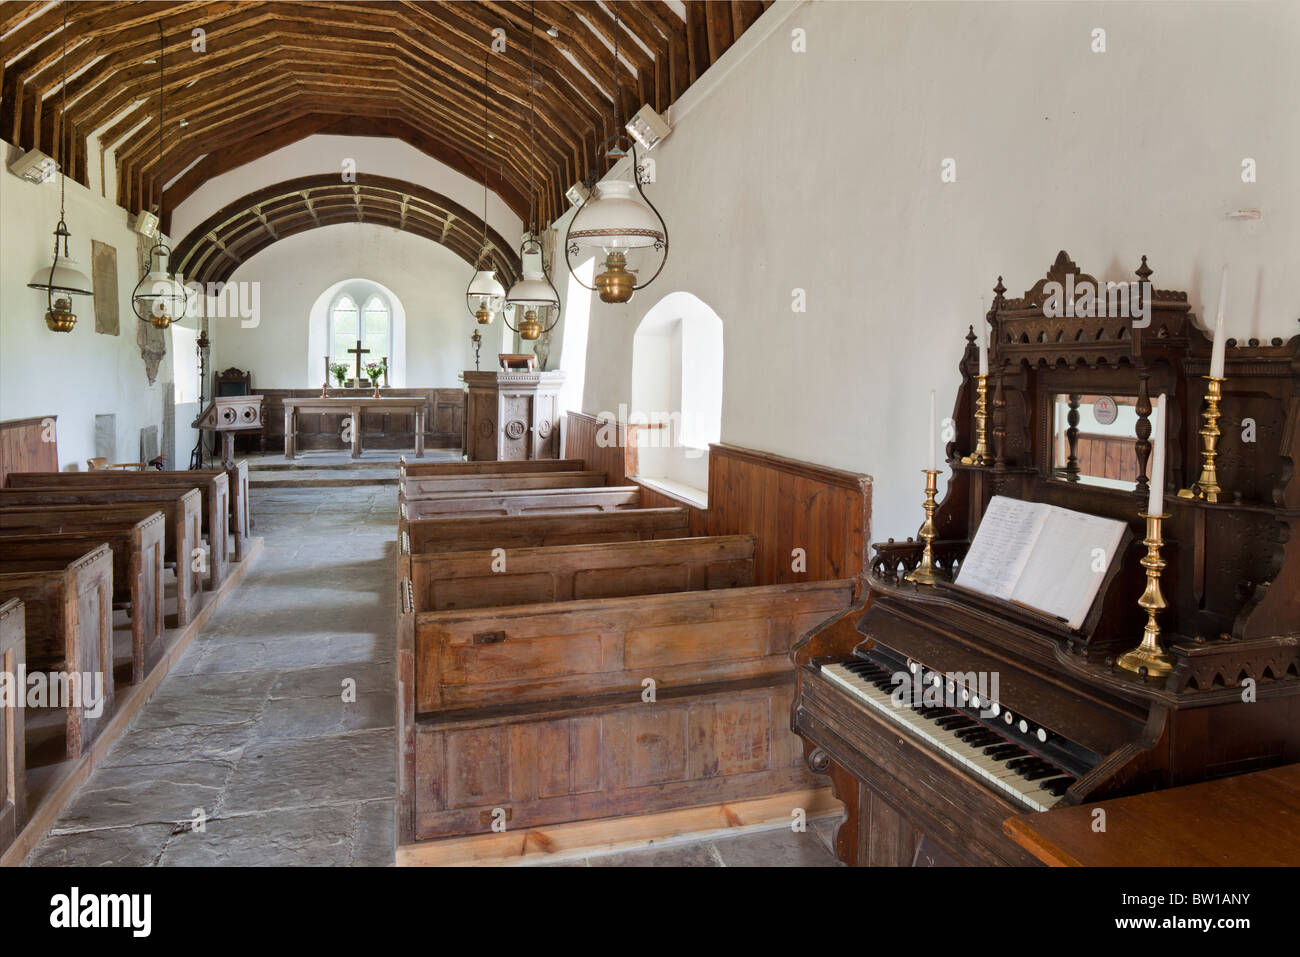 The simple, largely unspoilt, interior of 14th century St Marys church, Llanywern, Powys, Wales Stock Photo